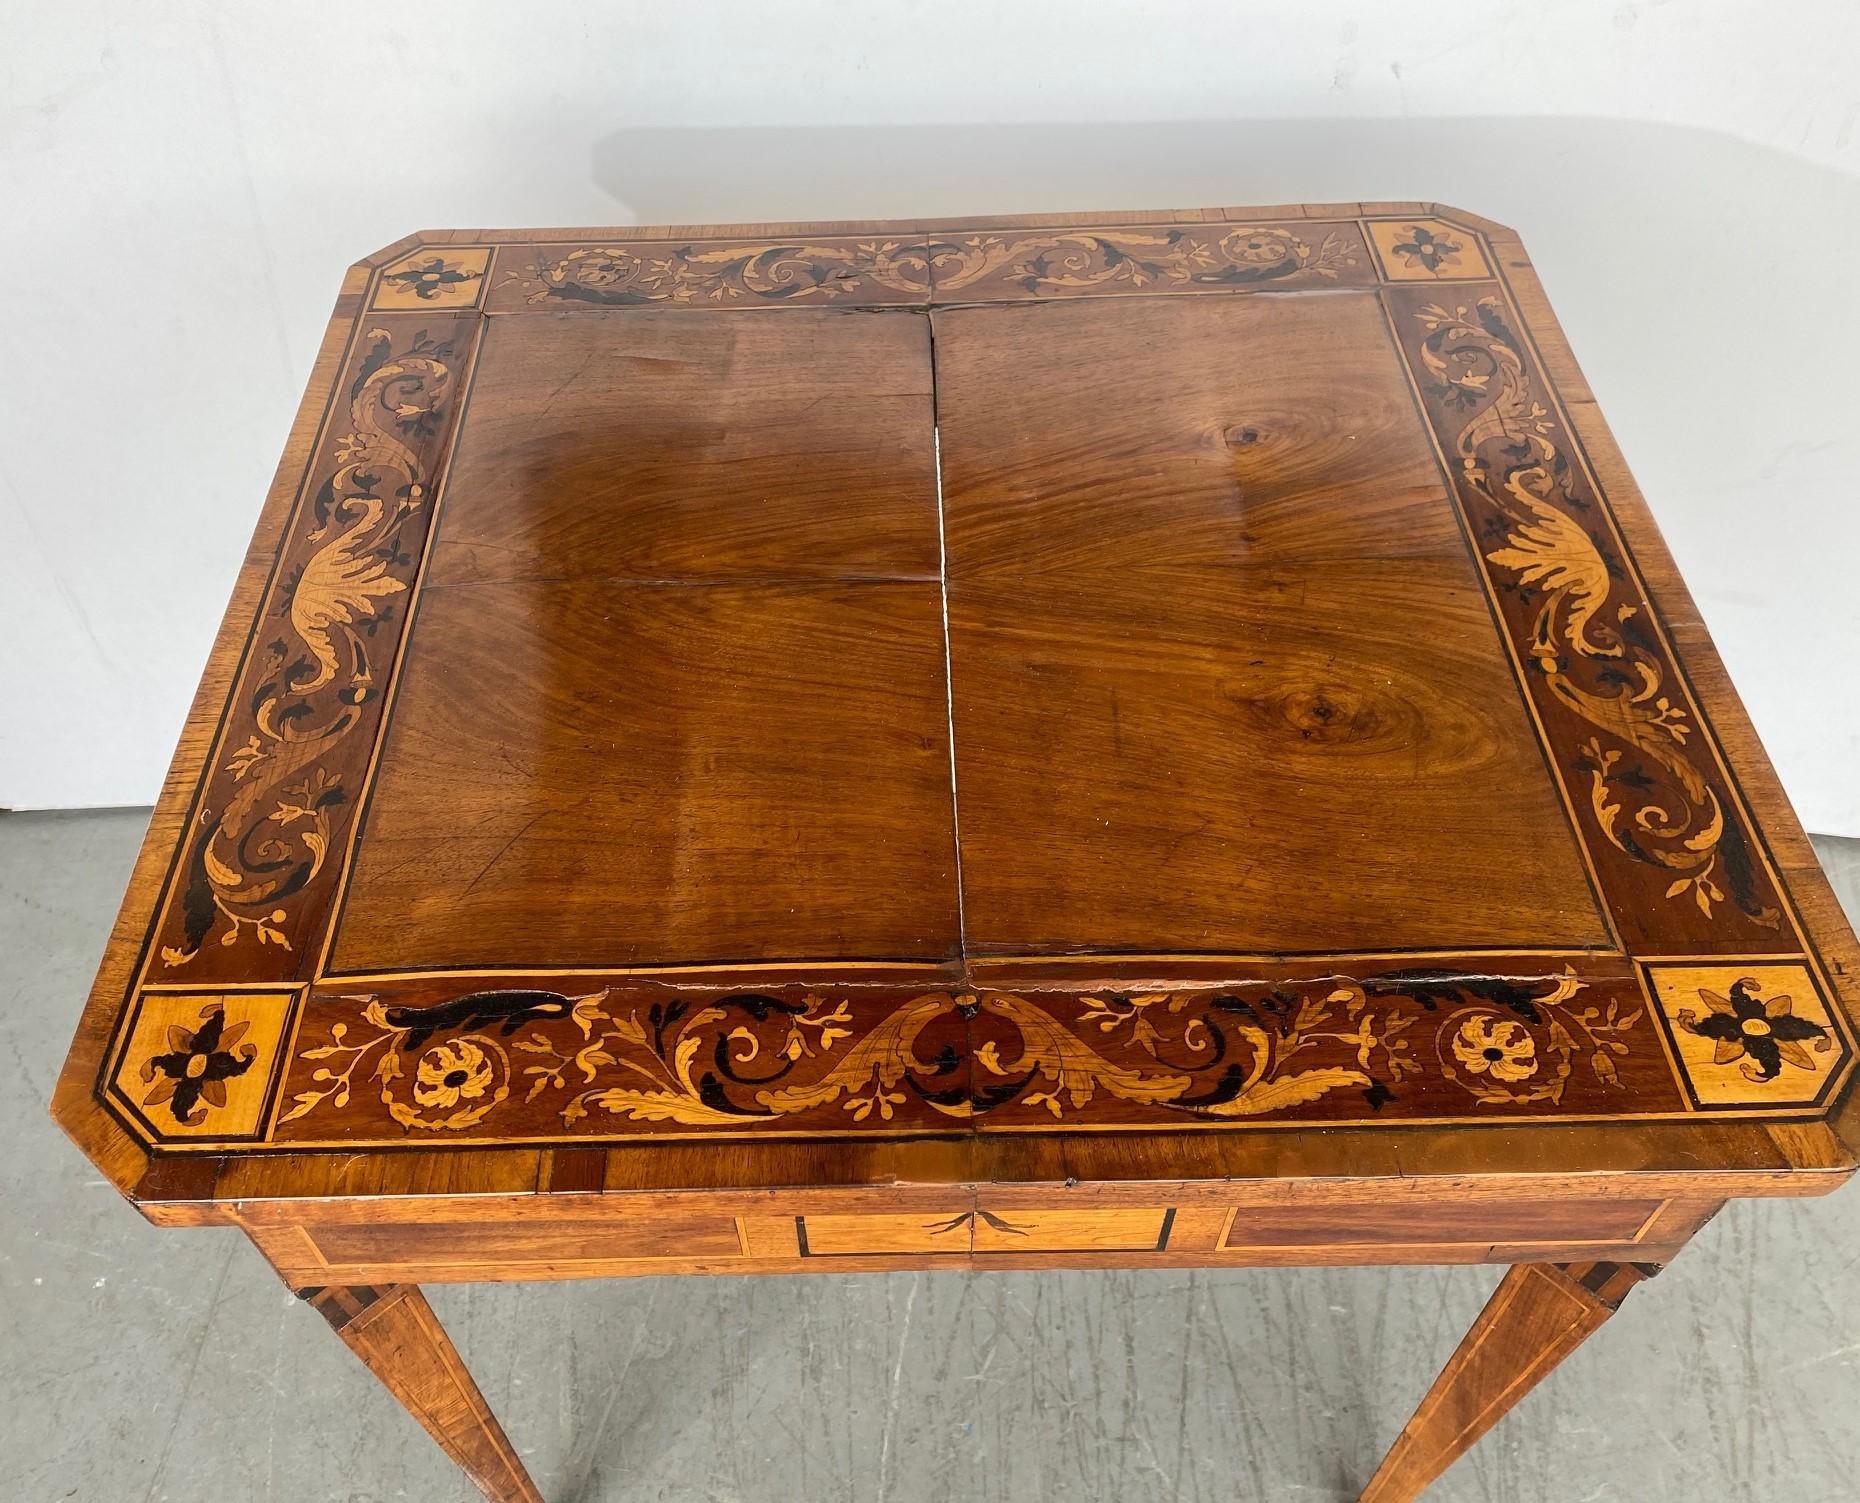  An Italian Game Table in various kinds of wood. Marquetry decorations with Acanthus leaf scrollwork using Ebony, Boxwood, and various other woods. Inlaid pinstriping to the legs. Some warping to the top that shows strongly under flash, see direct